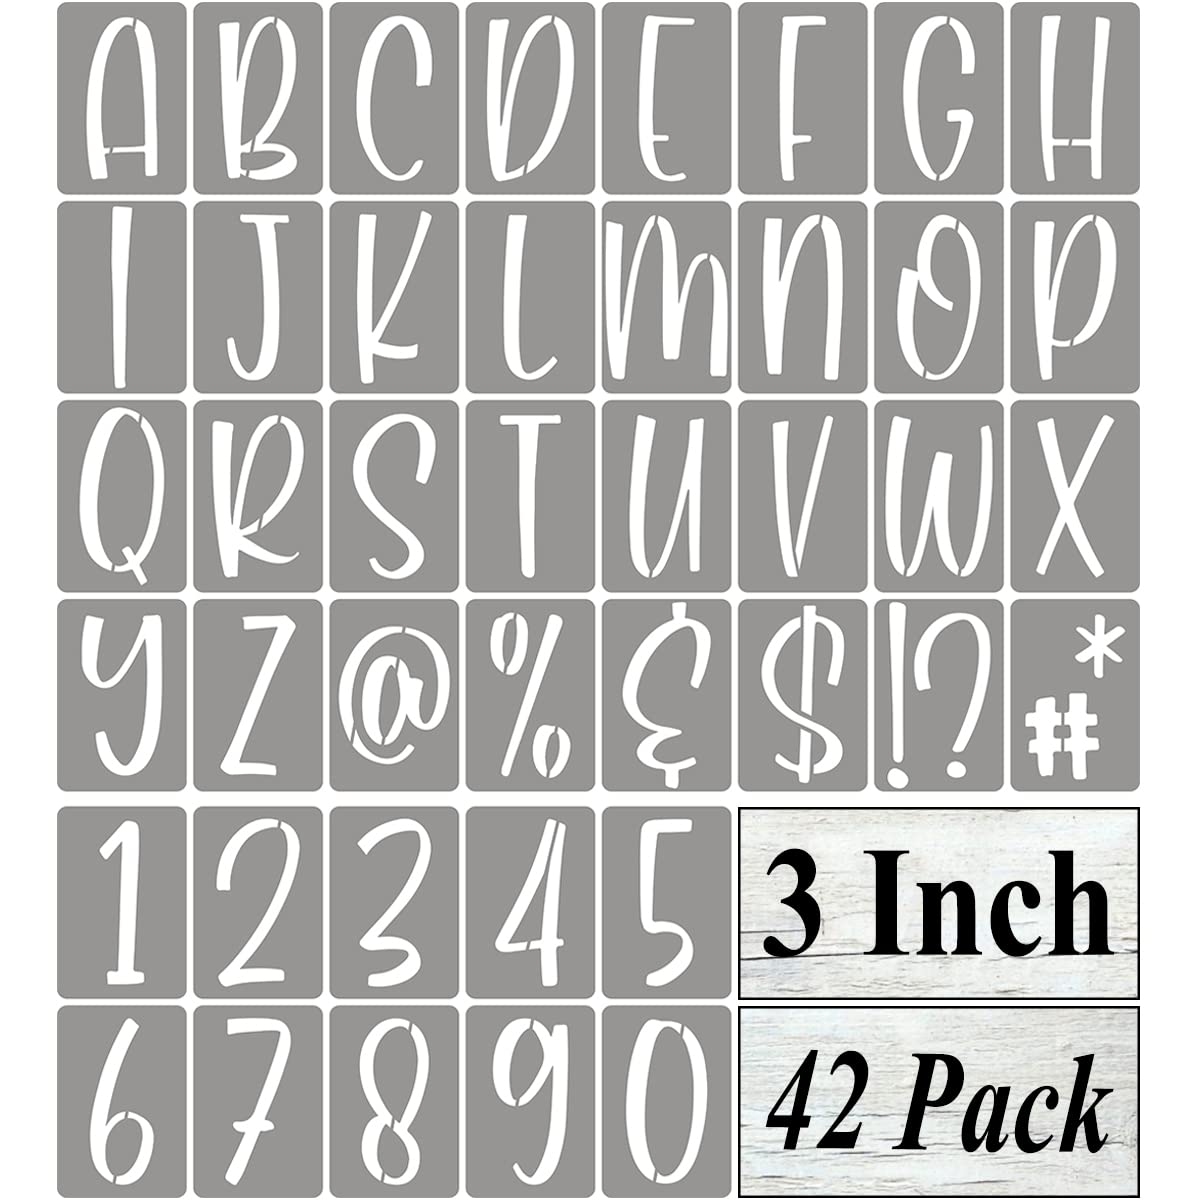  Letter Stencils, 3 Inch 42 Pack Reusable Number and